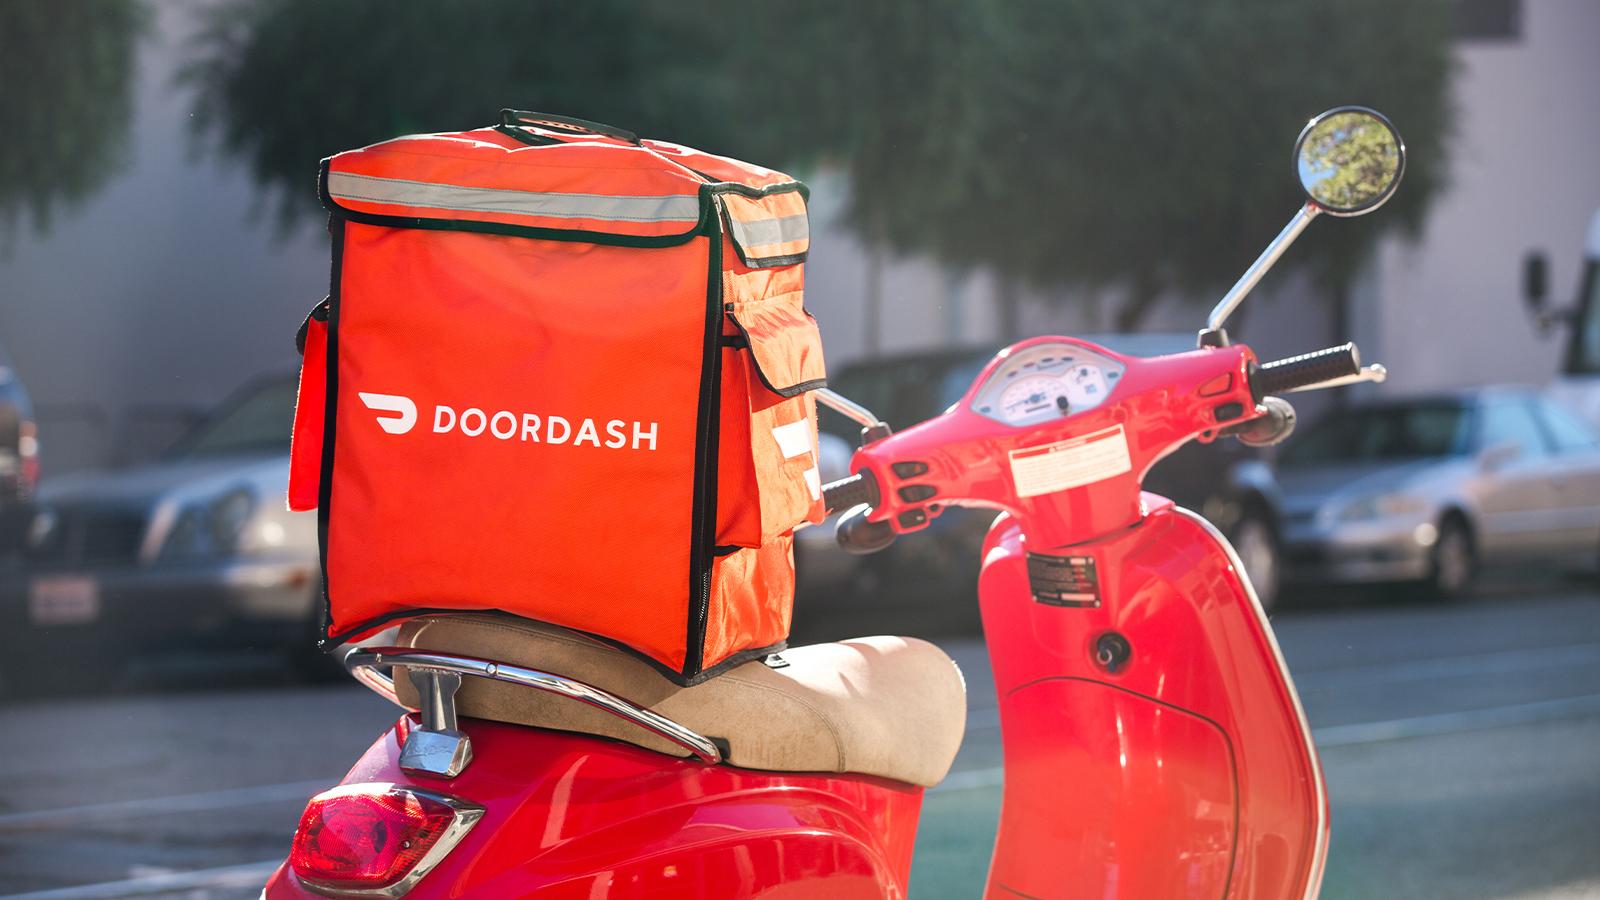 A red scooter with a DoorDash bag on the seat